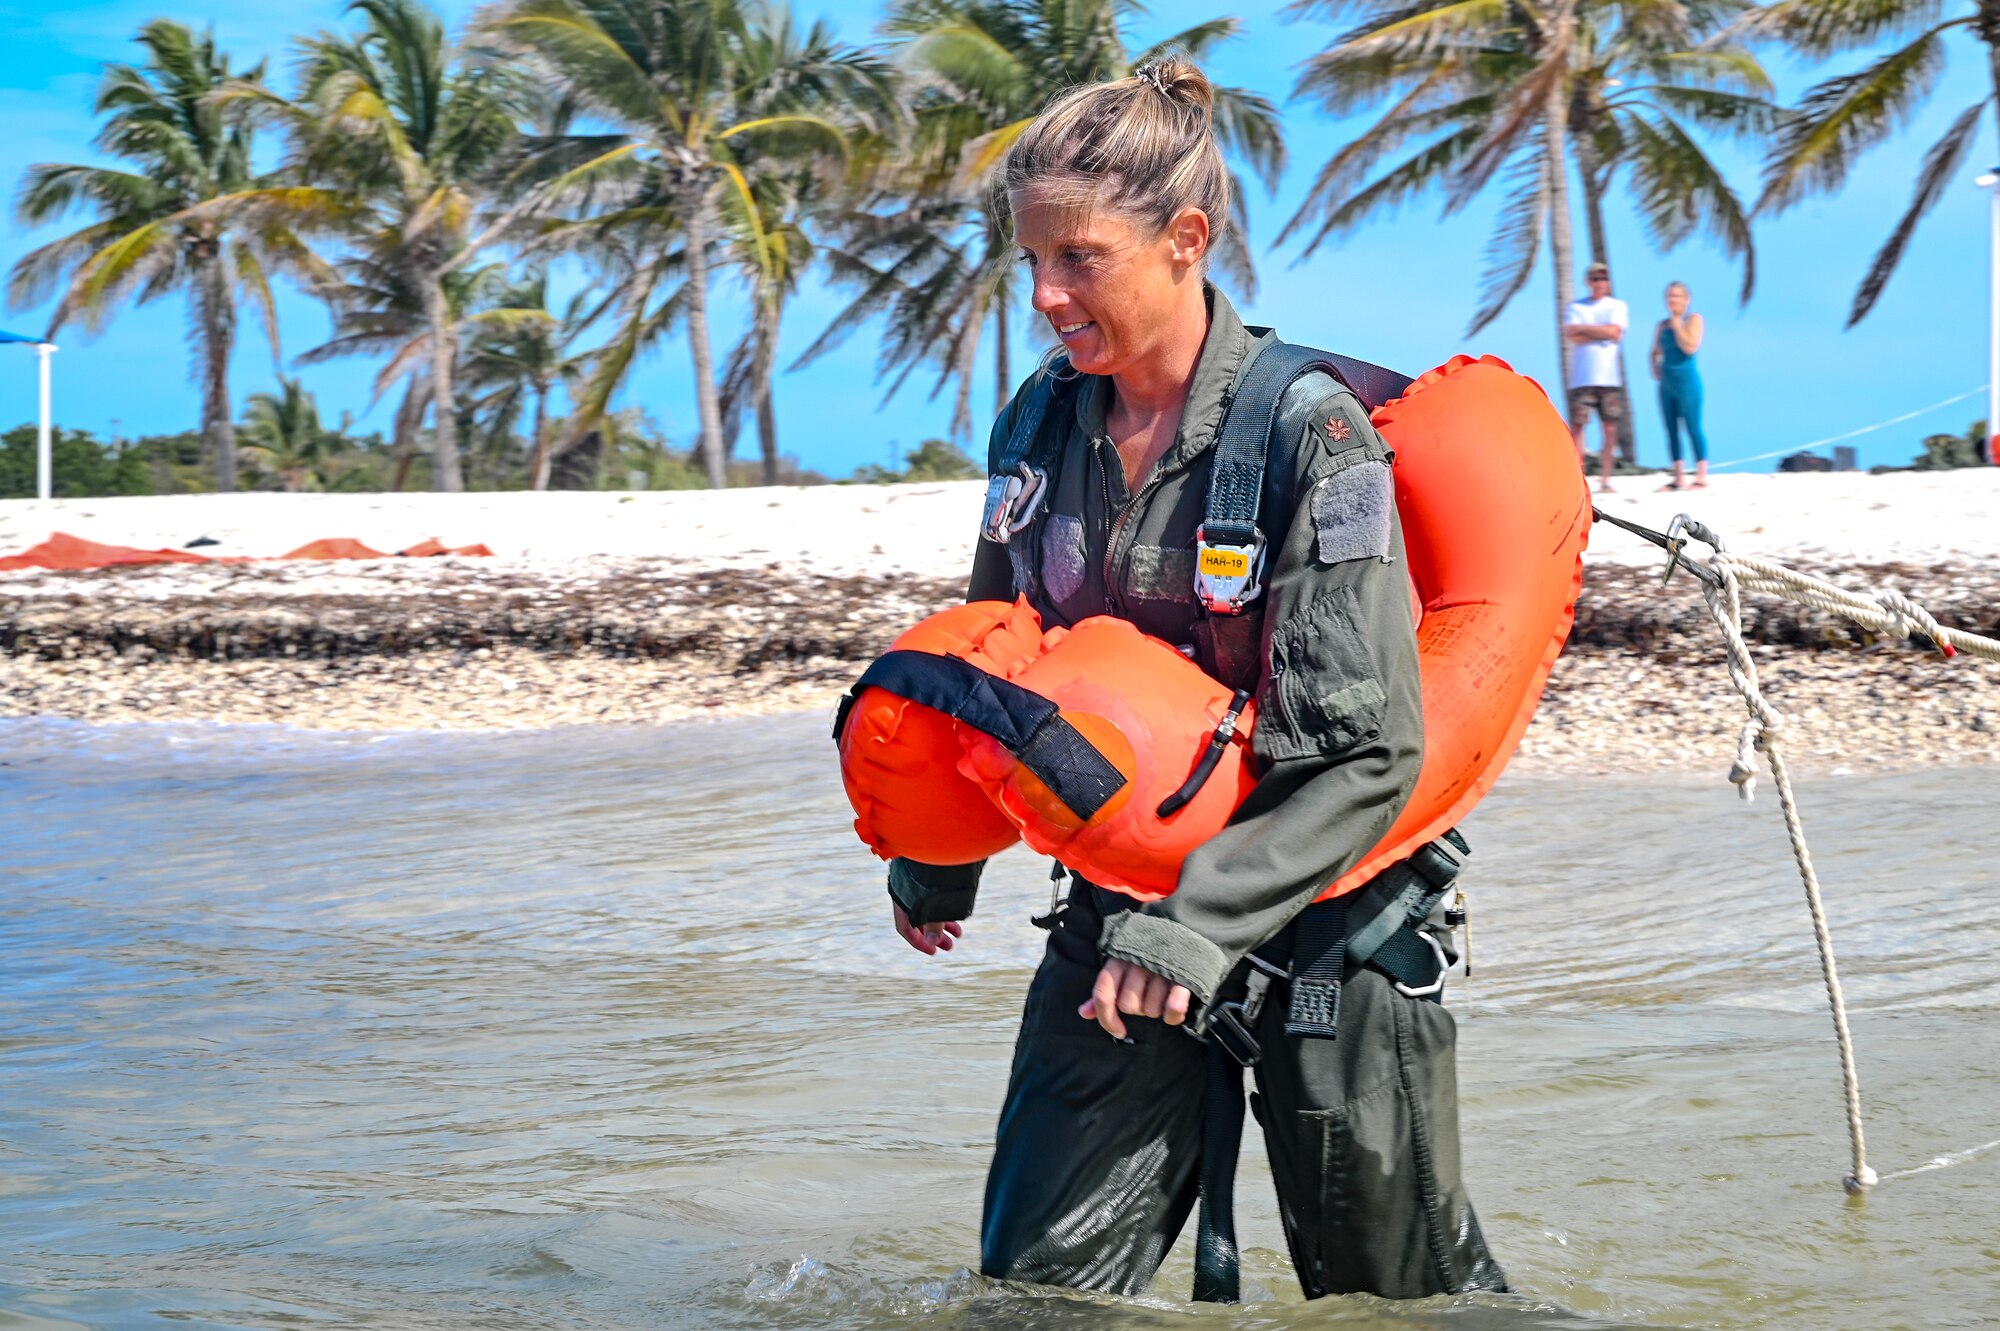 Maj. Shannon Baker, an instructor navigator assigned to the 757th Airlift Squadron, walks into the water during water survival training on April 19, 2023, at Naval Air Station Key West, Florida.